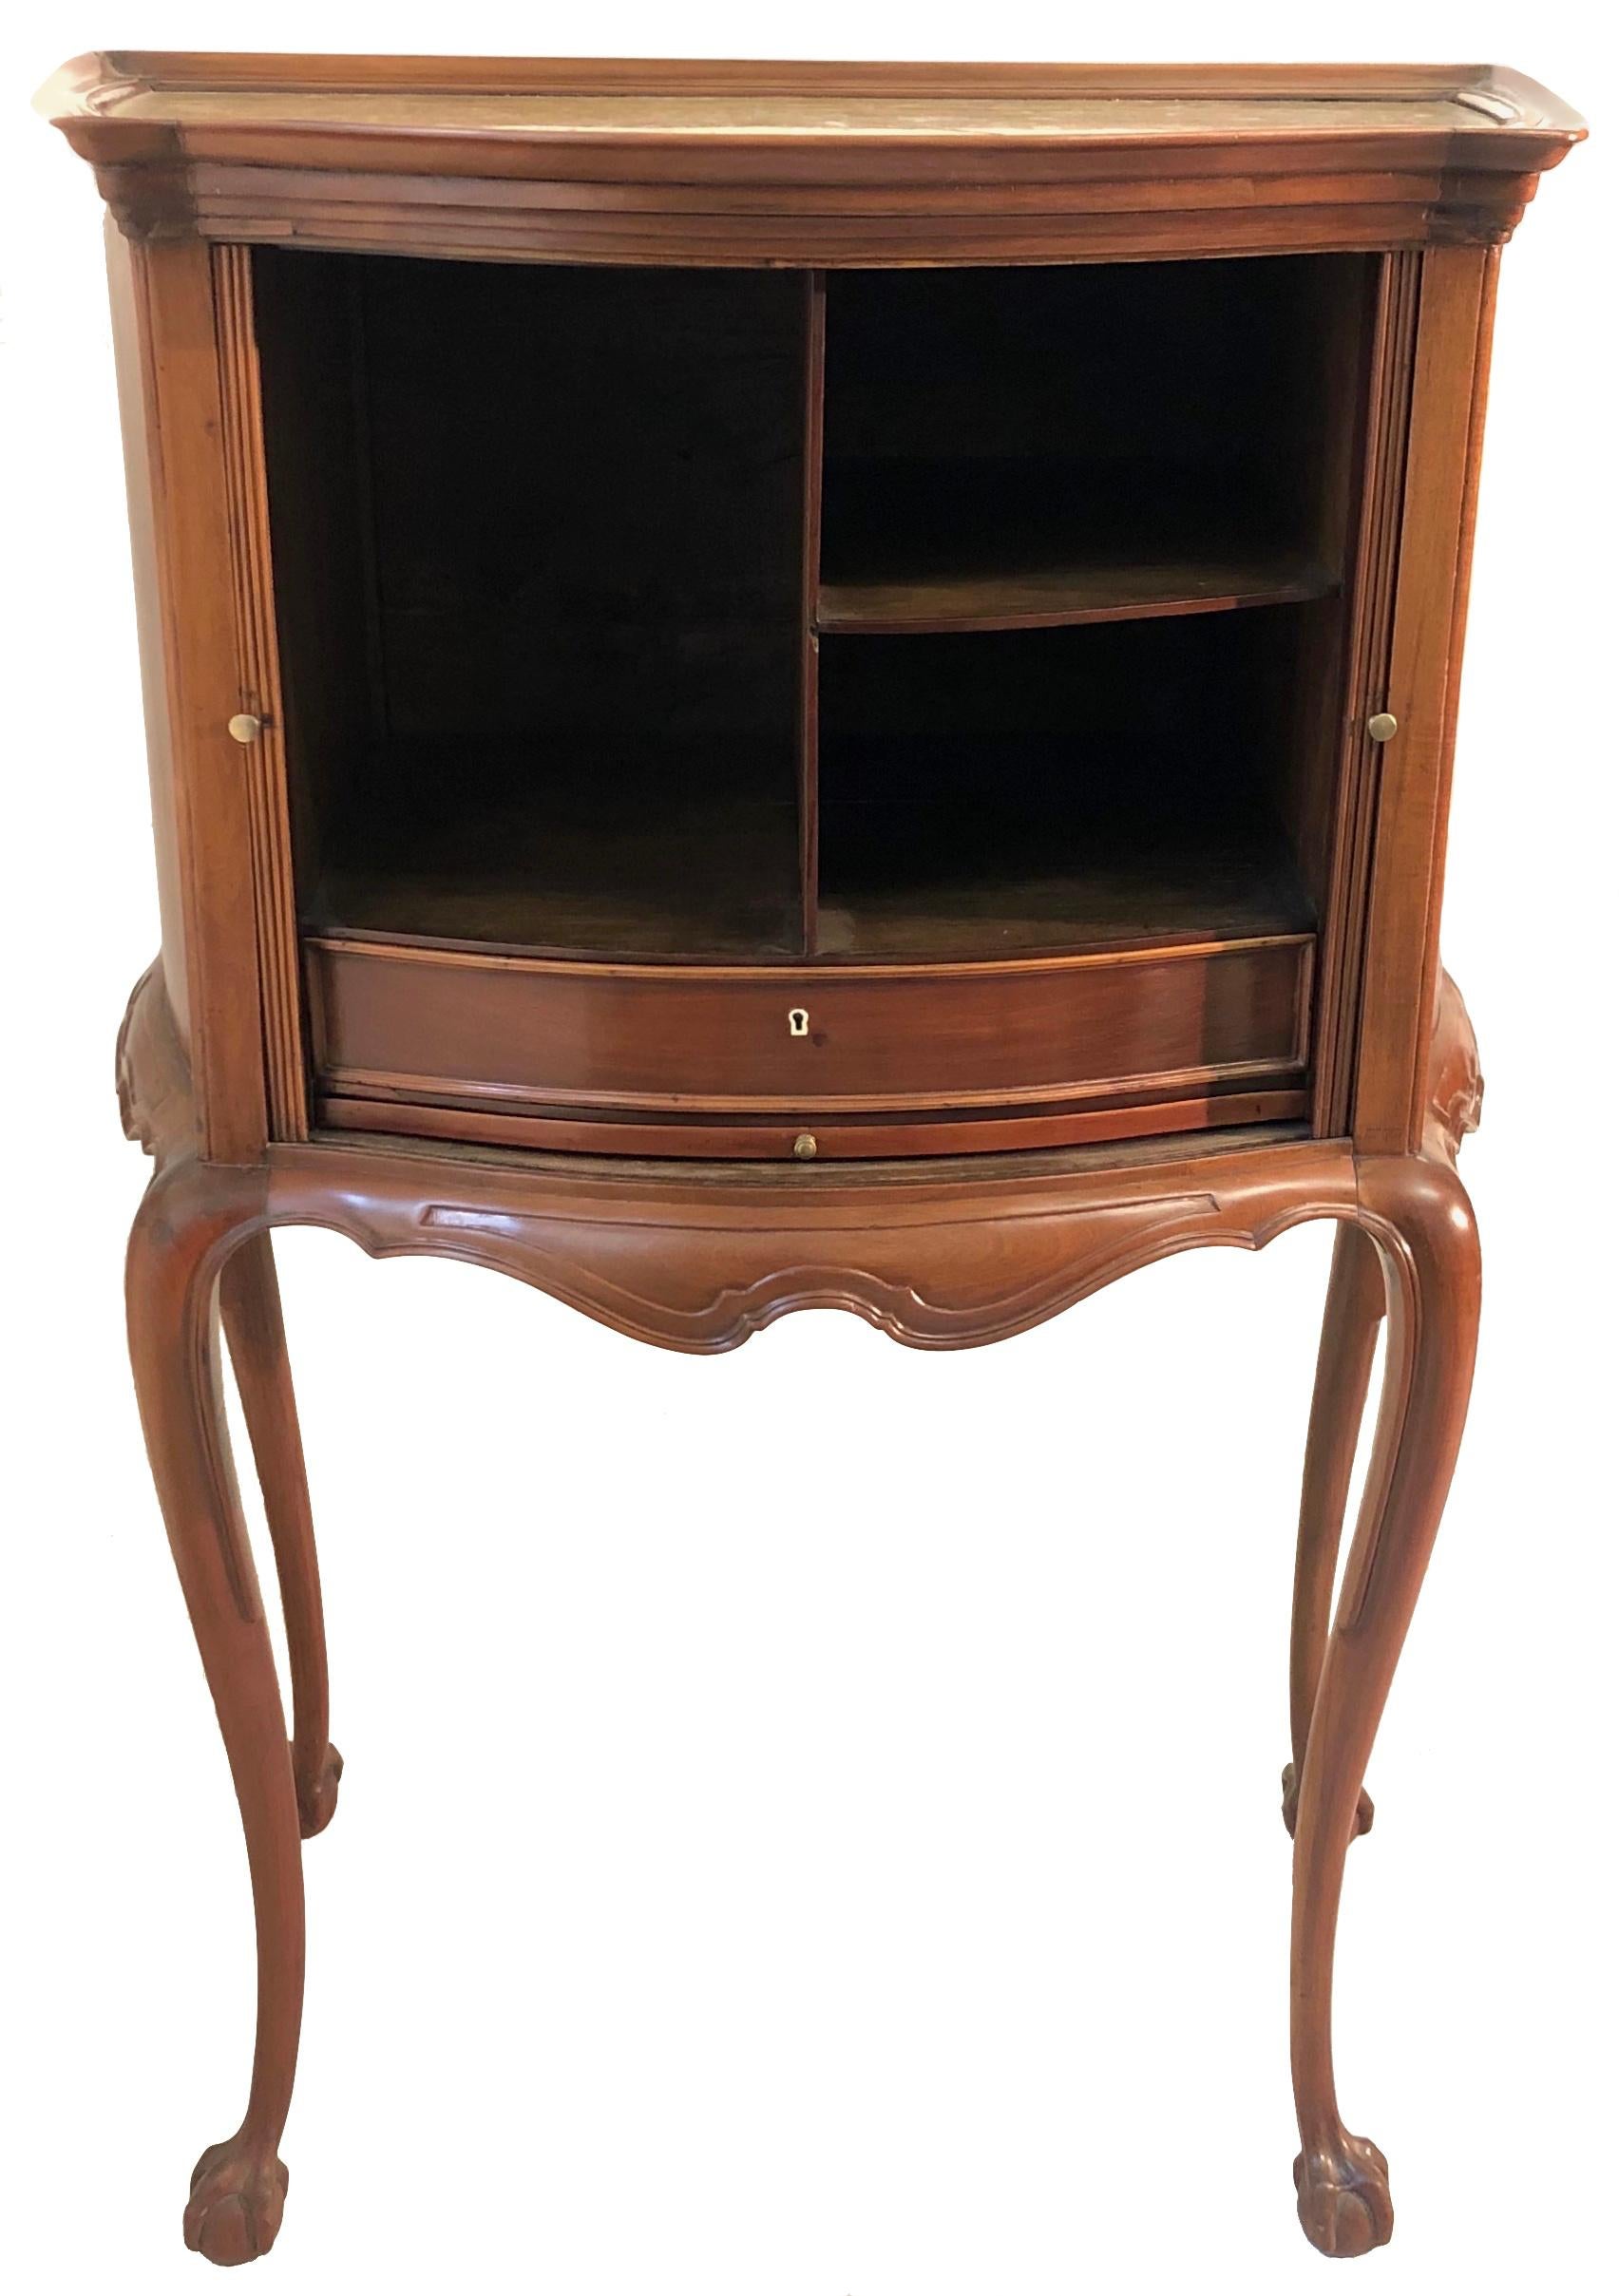 This charming writing and reading cabinet is made out of mahogany and oak. The top is covered by a warm yellow marble board fixated by an undulated mahogany frame. Two sliding doors reveal a drawer, storage space and a shelf for documents and